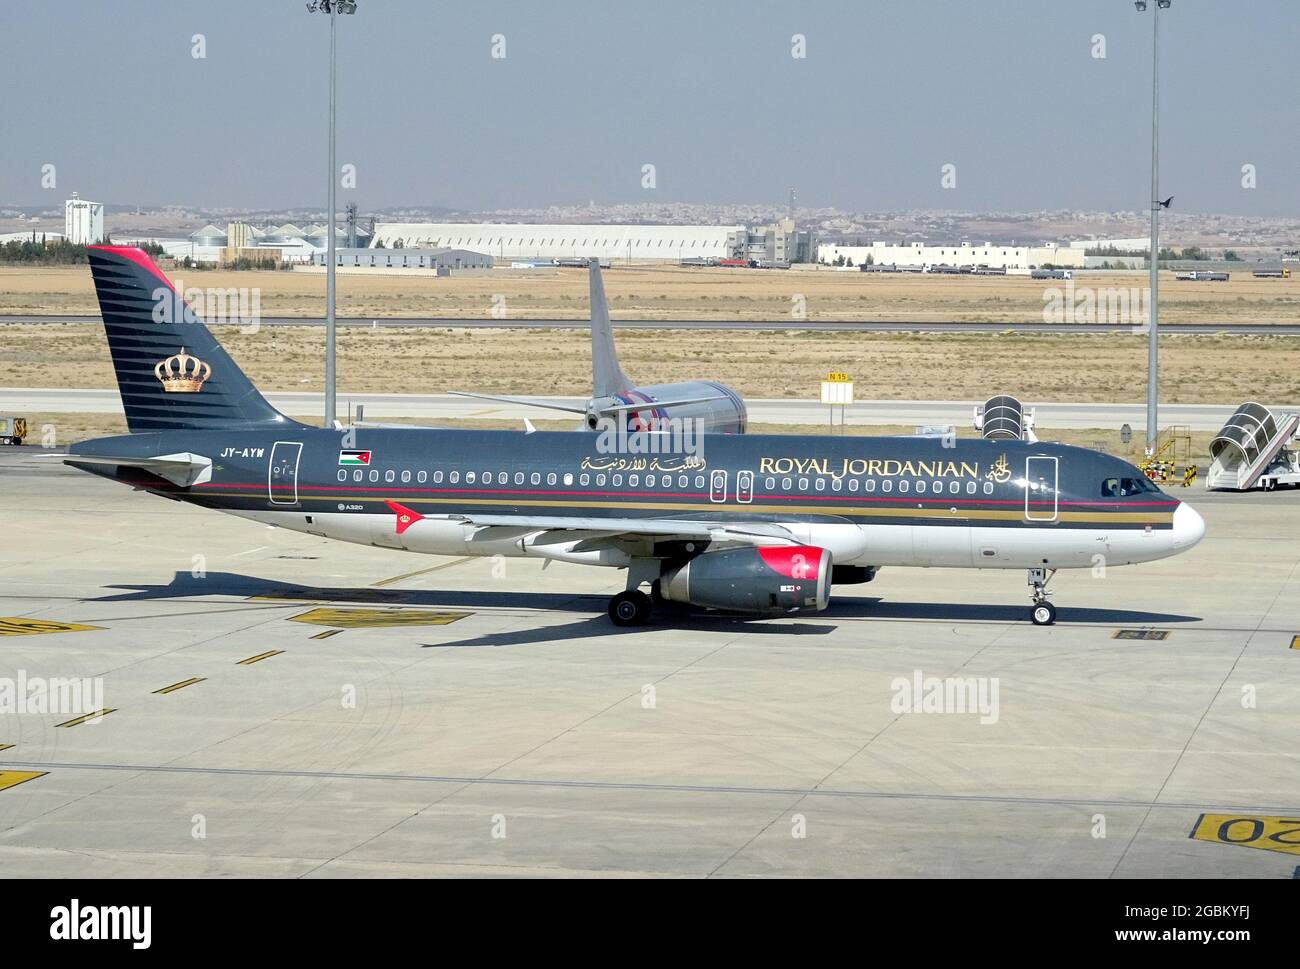 Royal Jordanian Airlines the flag airline Jordan), Airbus A320 airplane Stock - Alamy